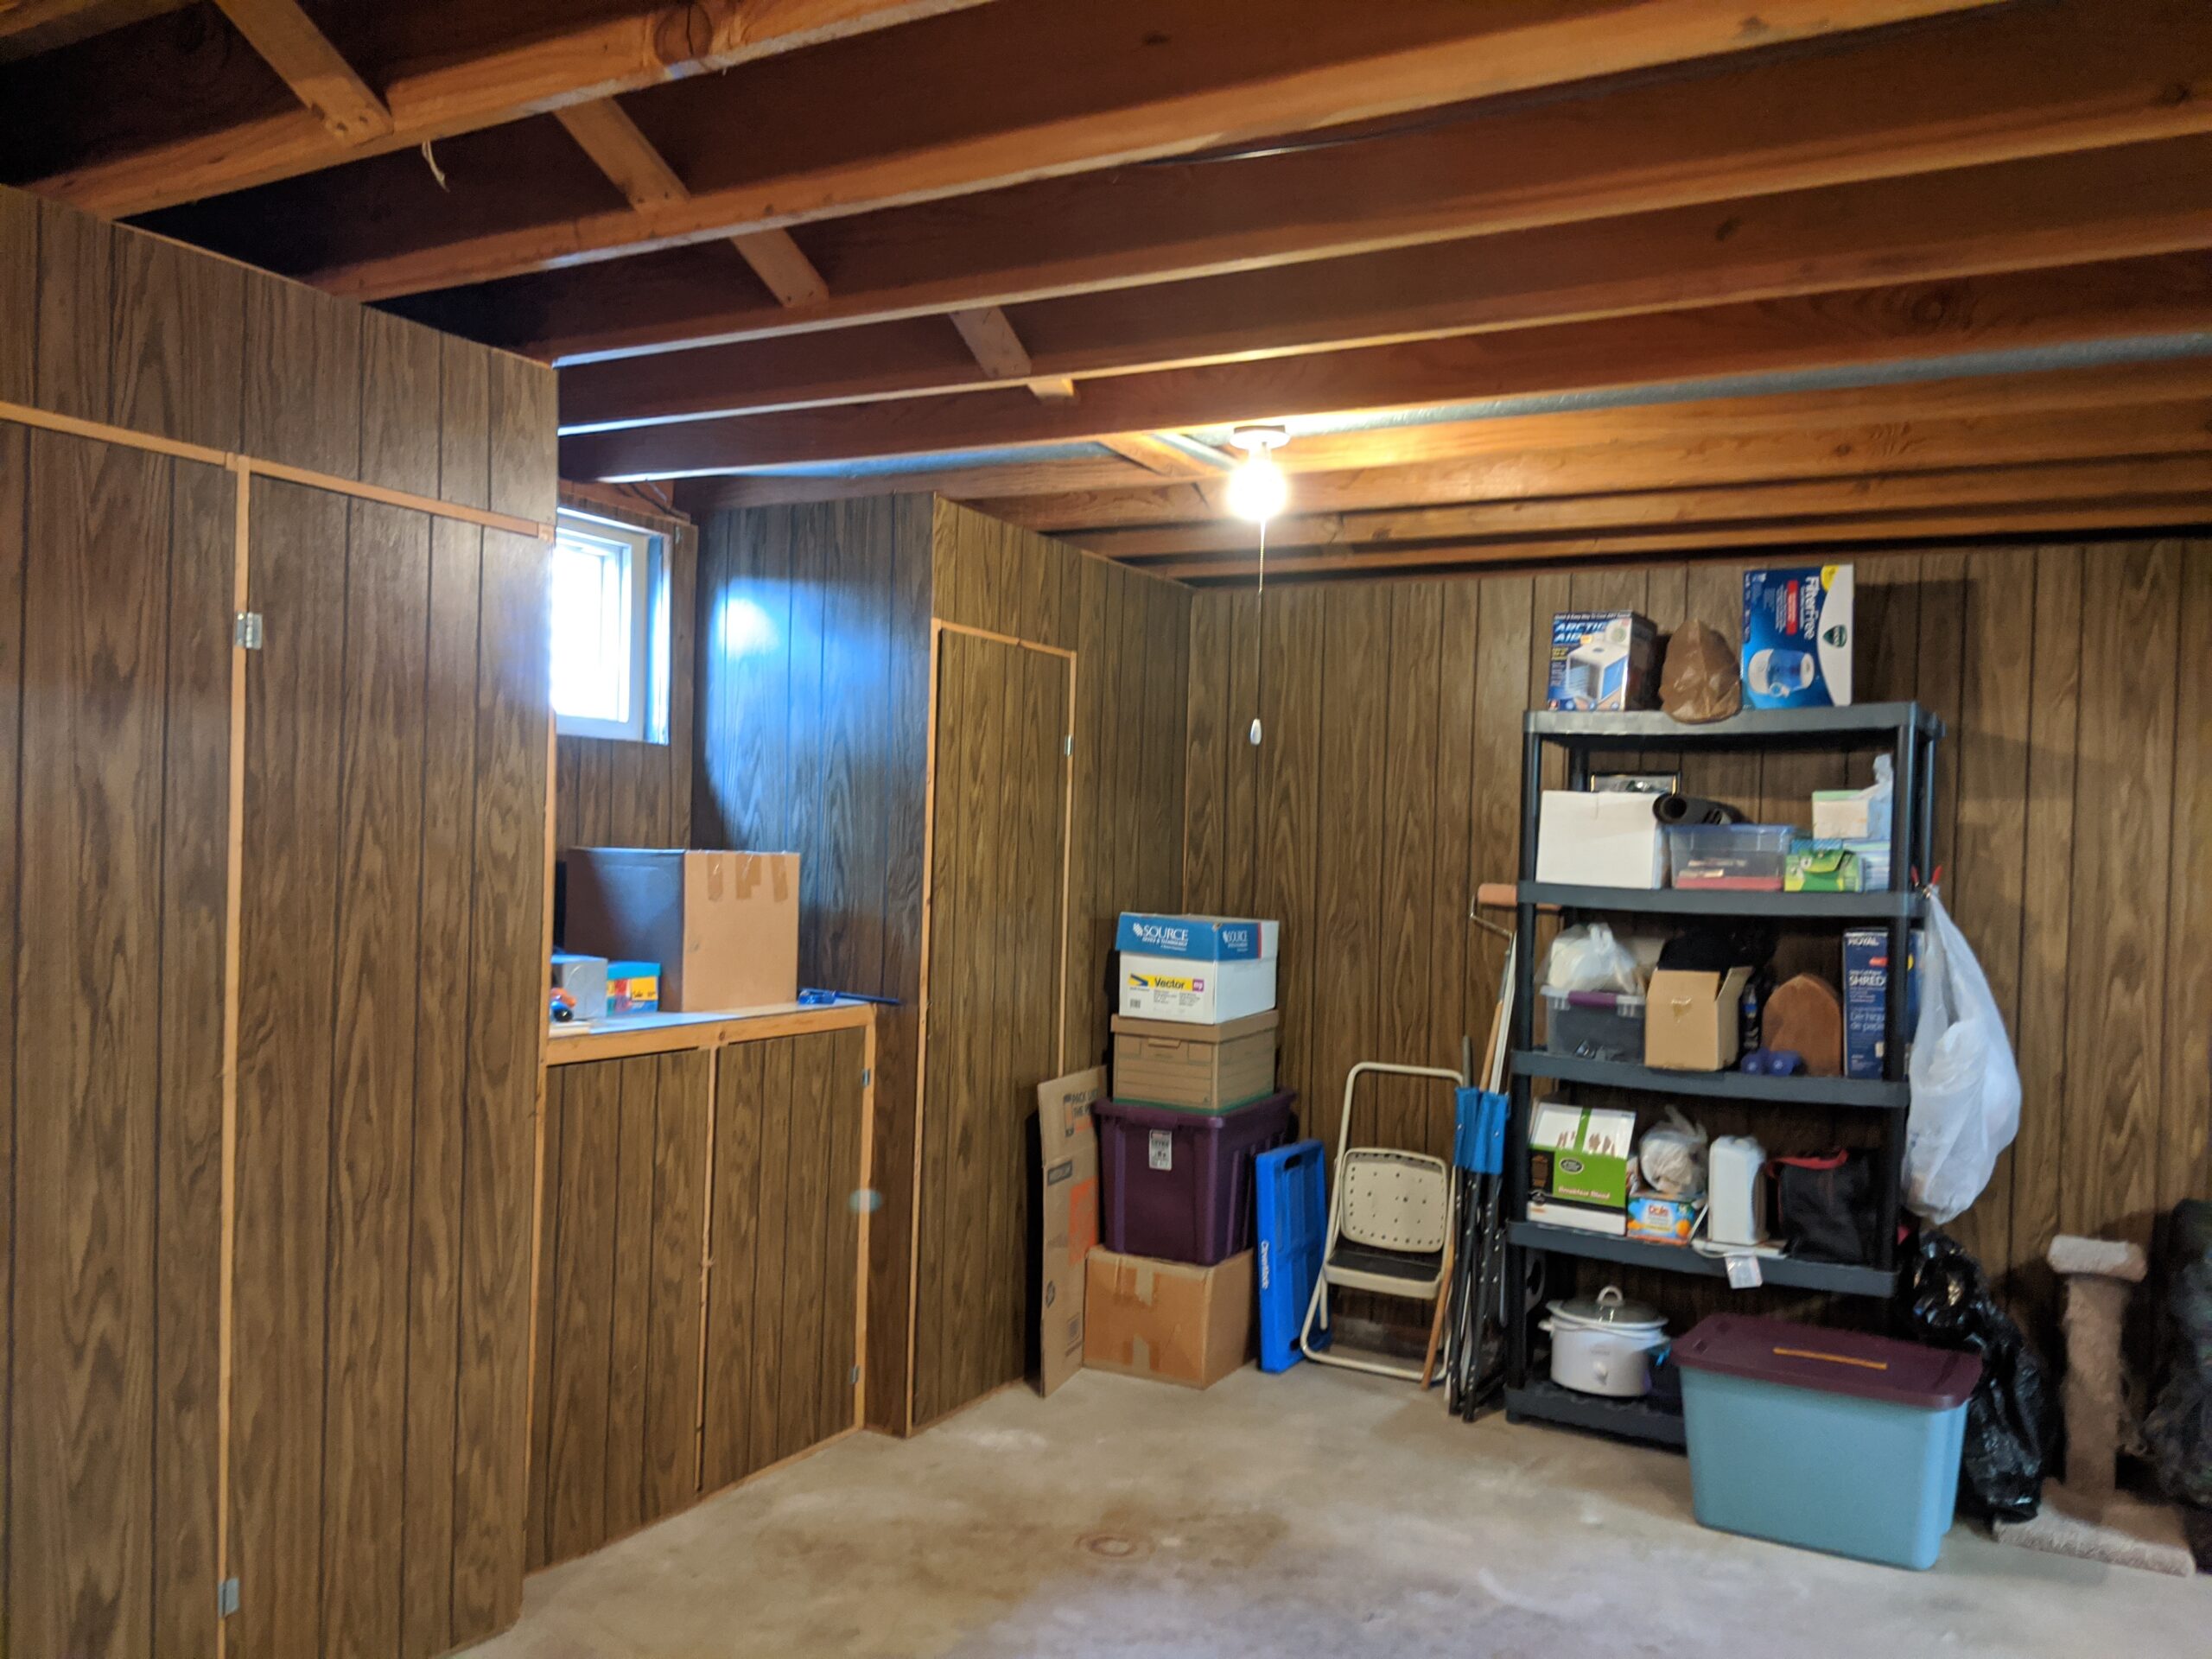 These cabinets and shelves kept things organized in the basement. Our remodel plans include a large storage area out of sight from the rec room.